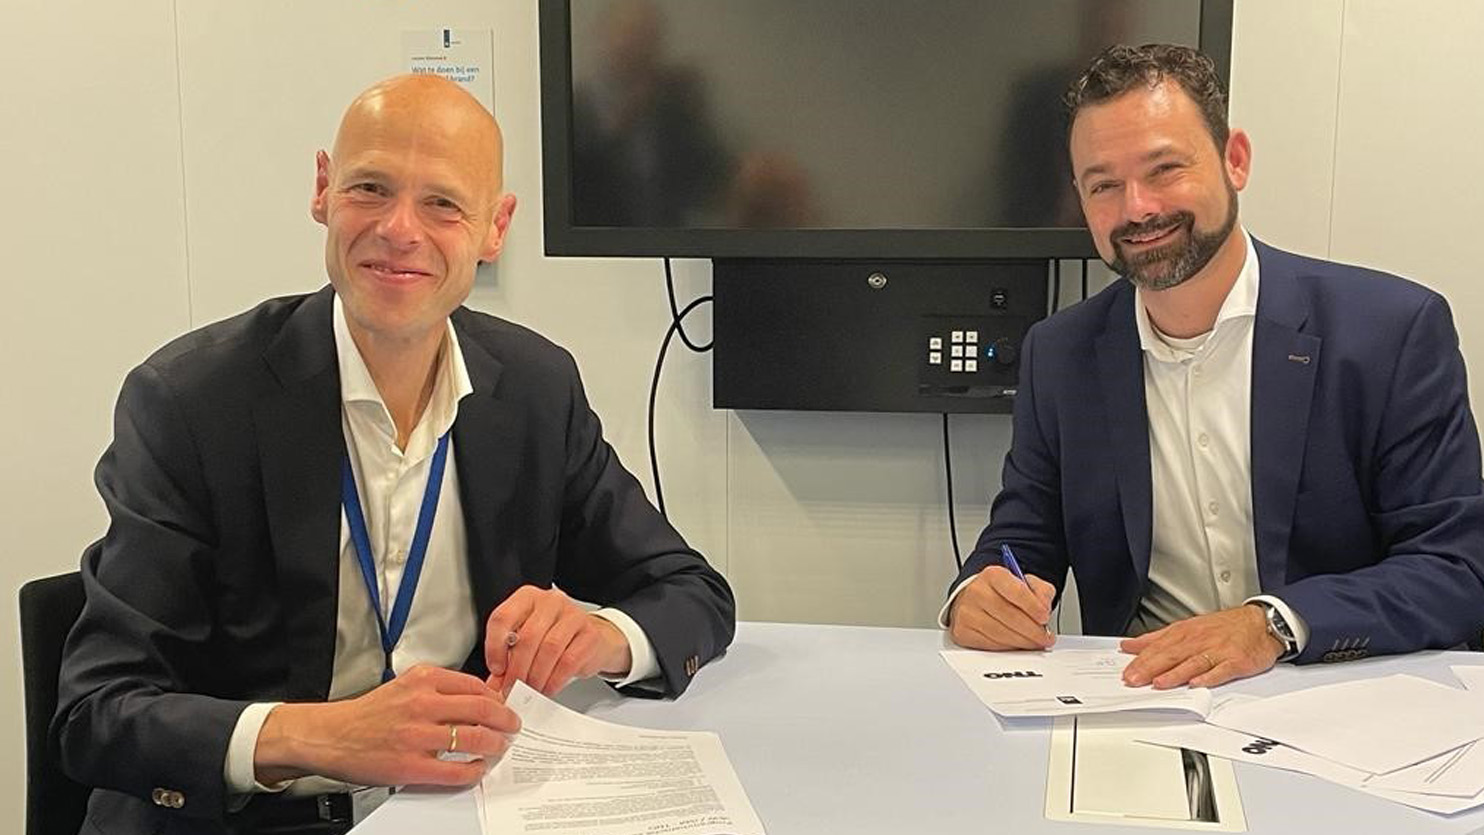 Martijn Stamm, Market Director of TNO Traffic & Transport, and Dylan Koenders, Director of Mobility Innovation and Strategy at the Ministry of Infrastructure and Water Management, signed an Agreement Framework